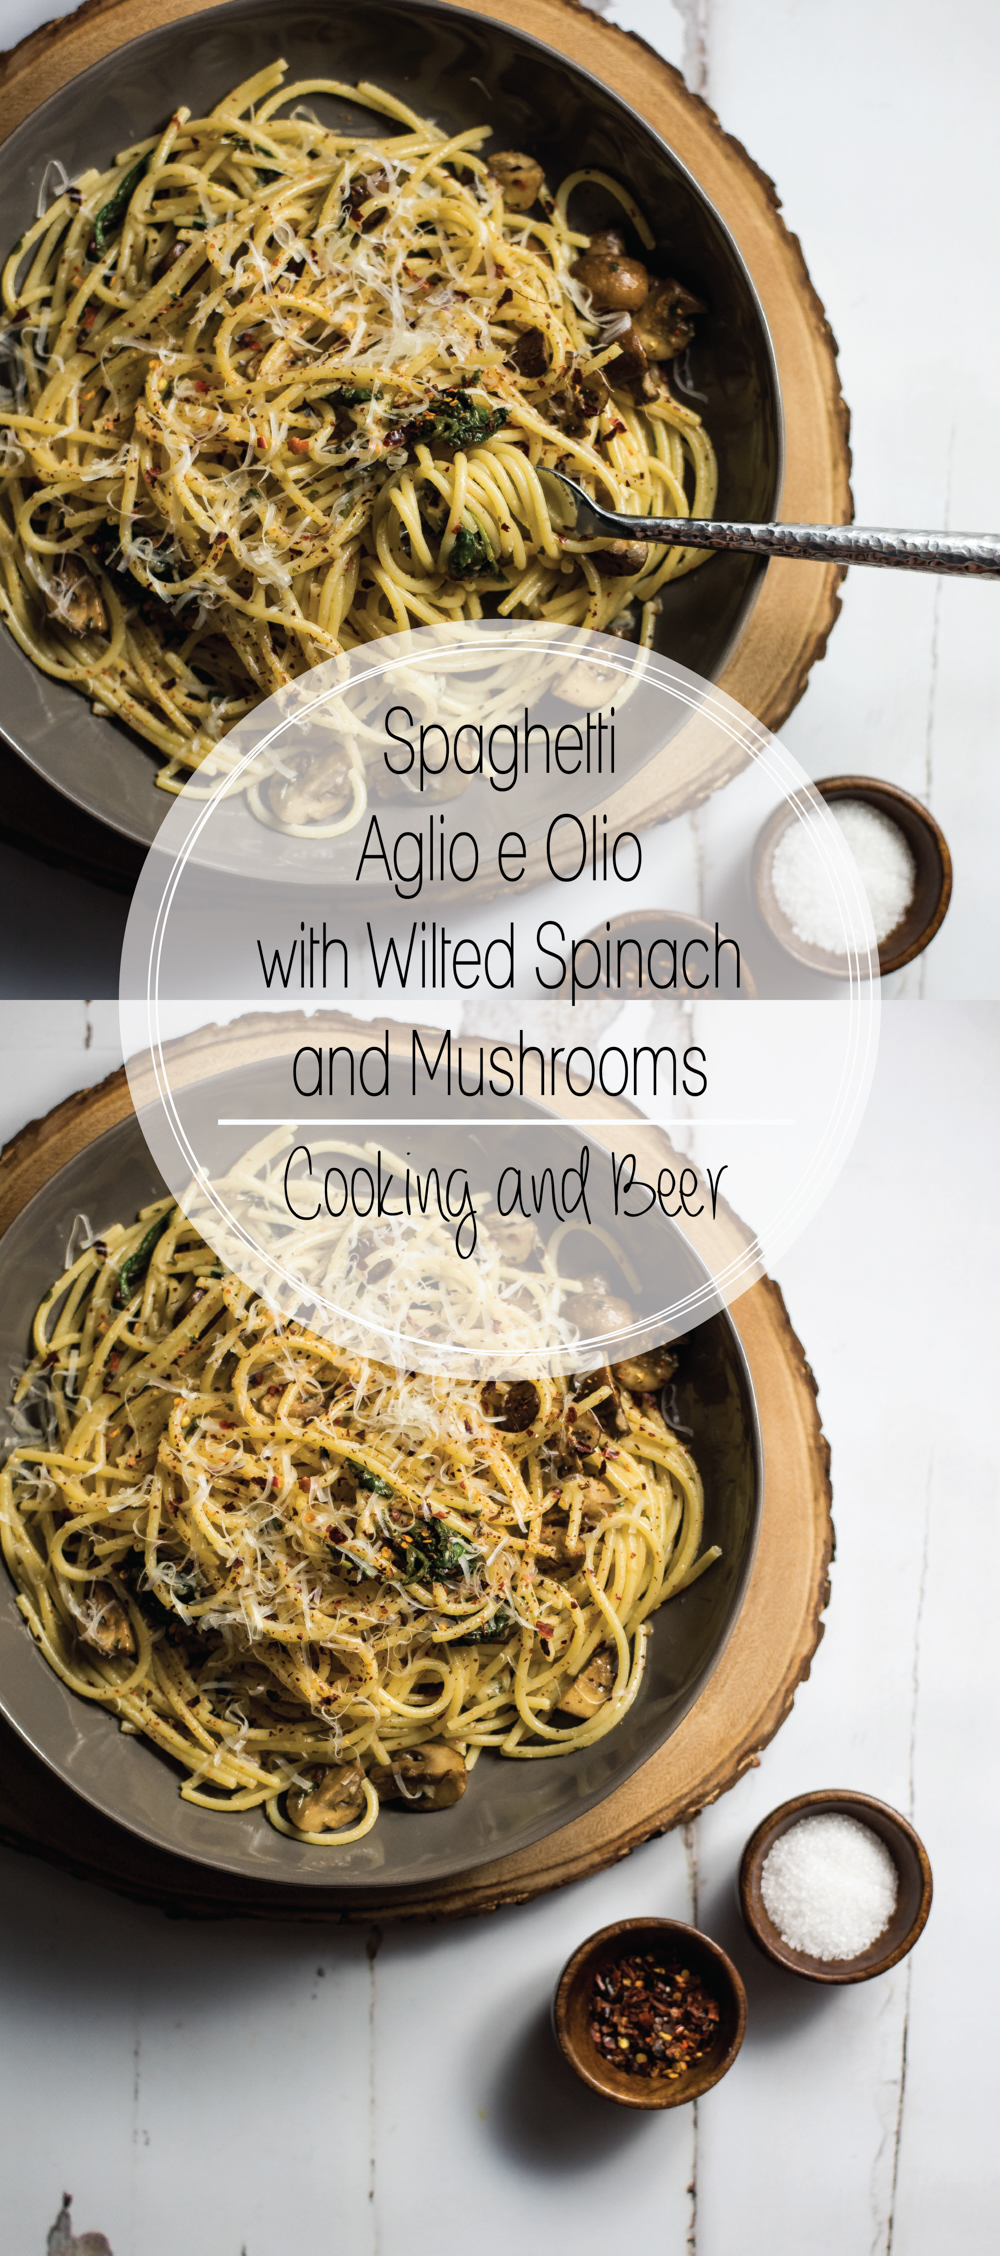 The sound of Spaghetti Aglio e Olio with Wilted Spinach and Mushrooms may sound intimidating, but this classic Italian dish with a twist, is super simple!